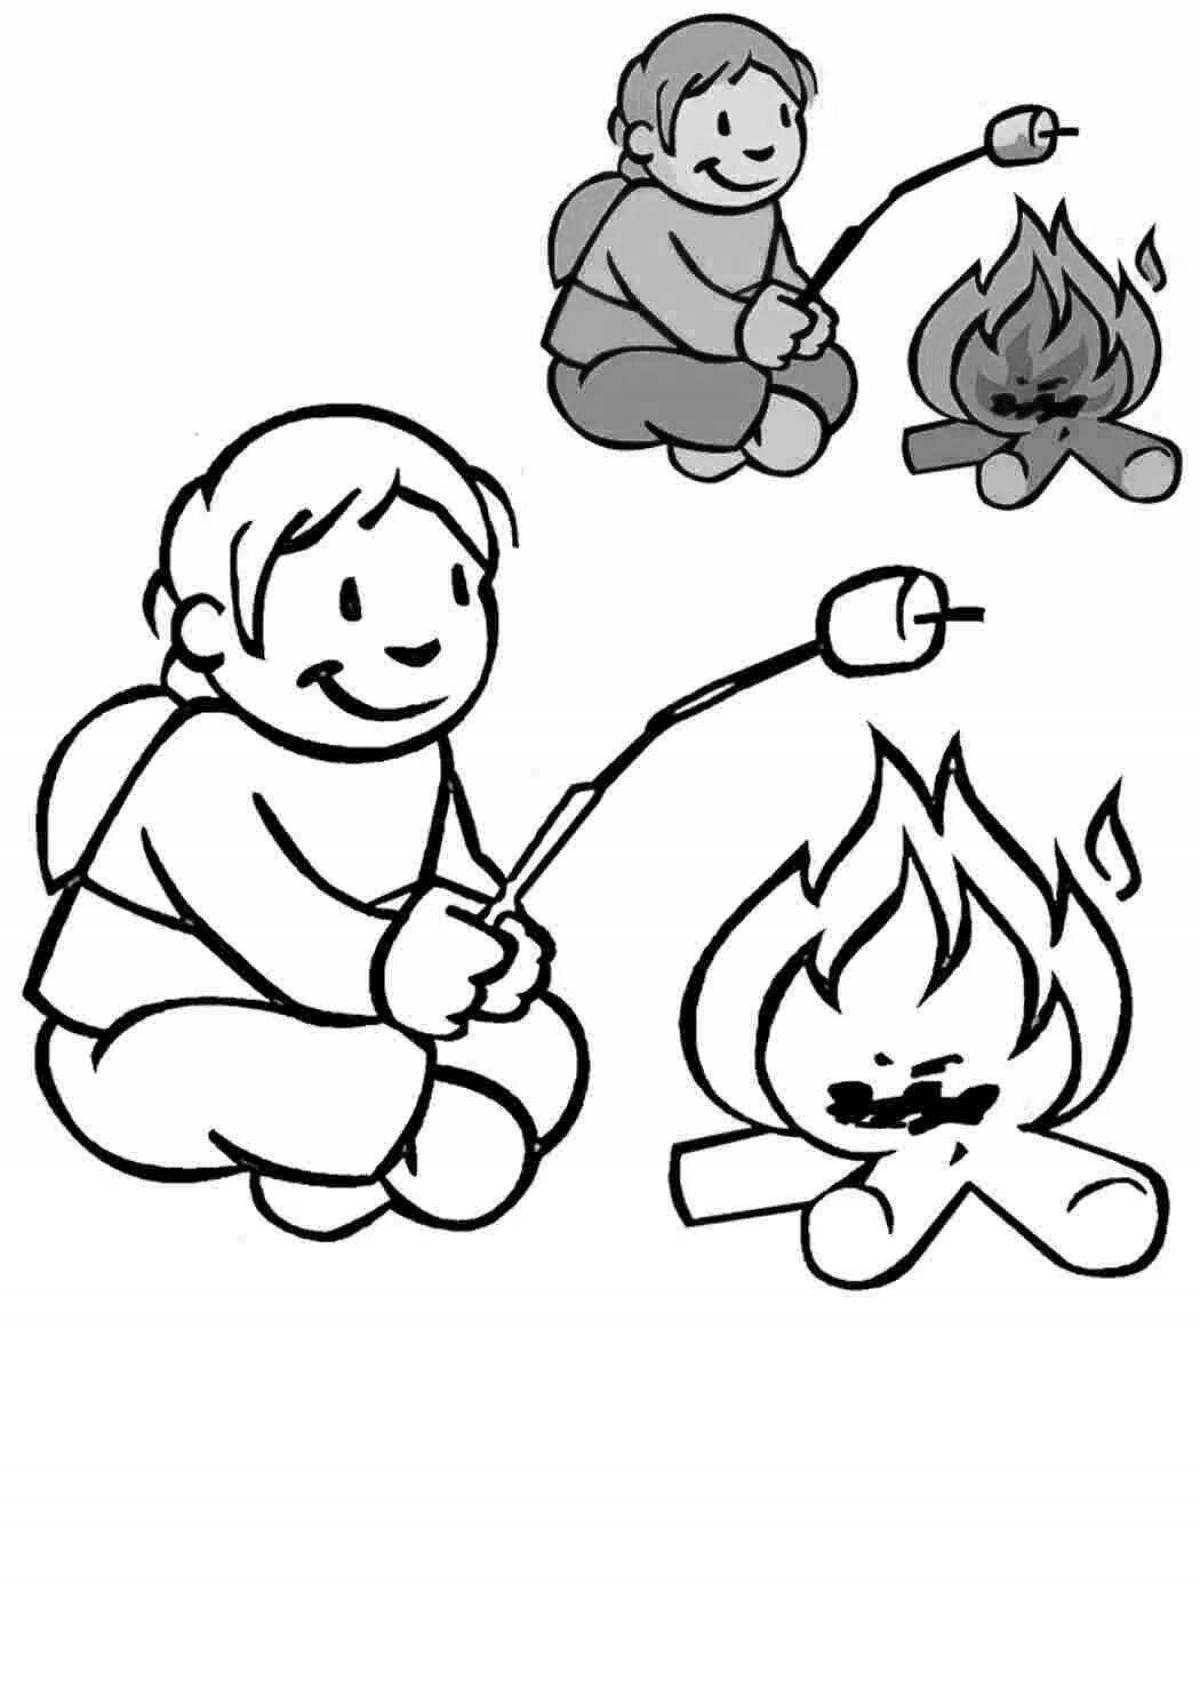 Children's Bonfire Coloring Pages for Toddlers